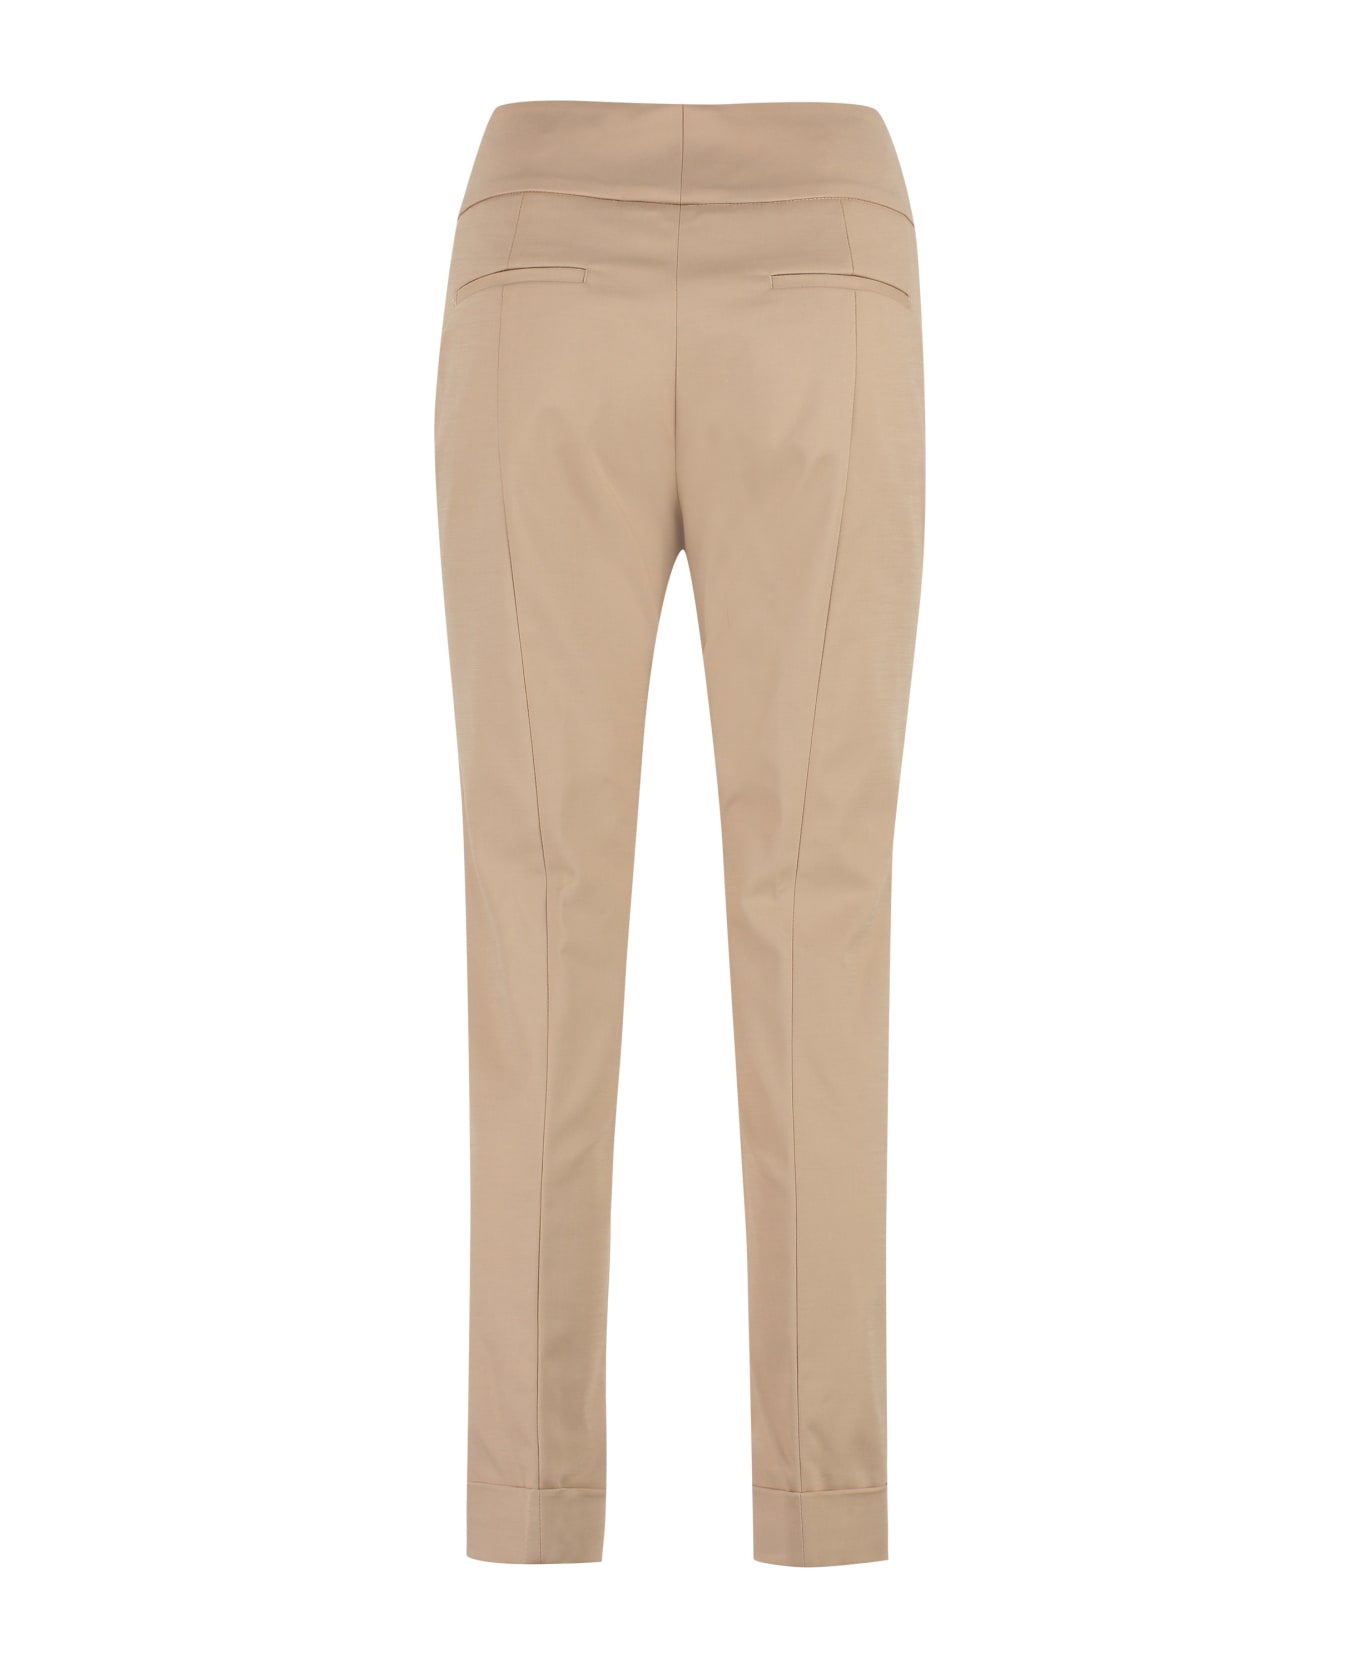 Peserico High-rise Cotton Trousers - Beige ボトムス